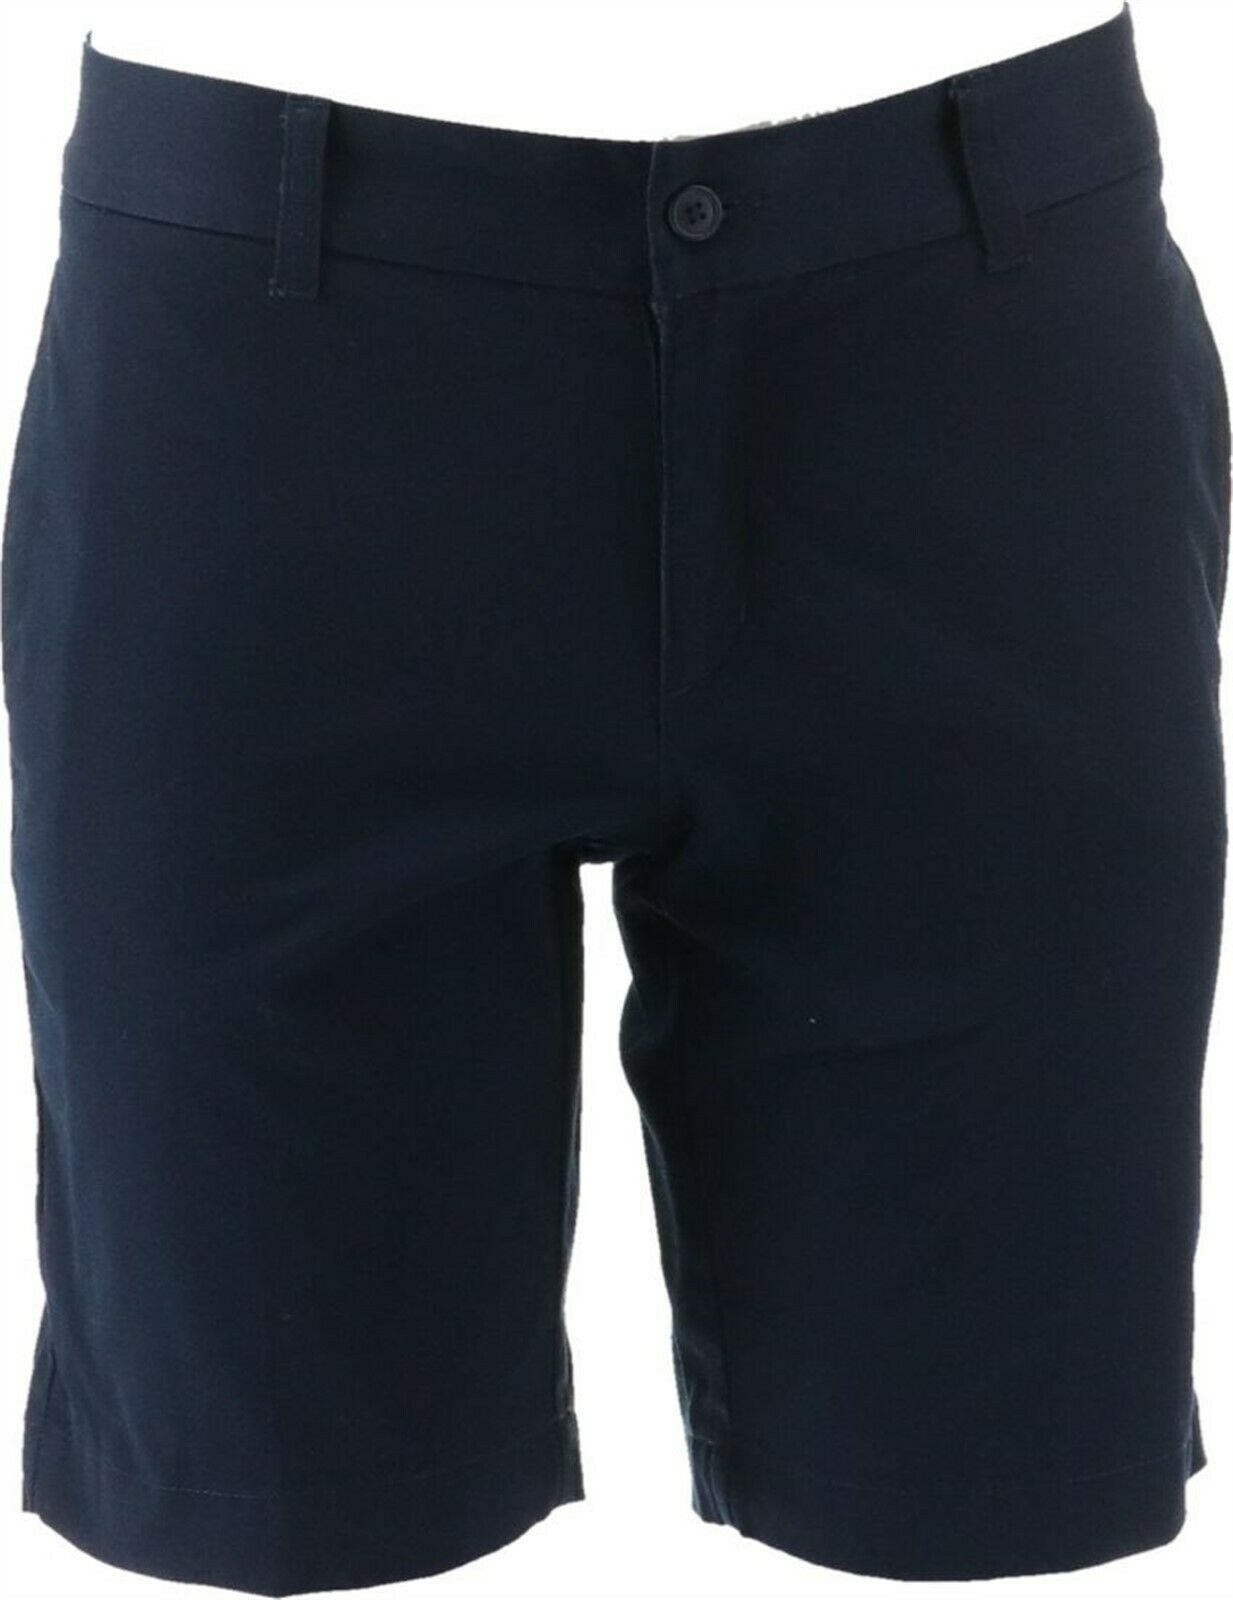 Lands' End Junior's Plain Front Blend Chino Shorts Classic Navy 13 NEW 403783